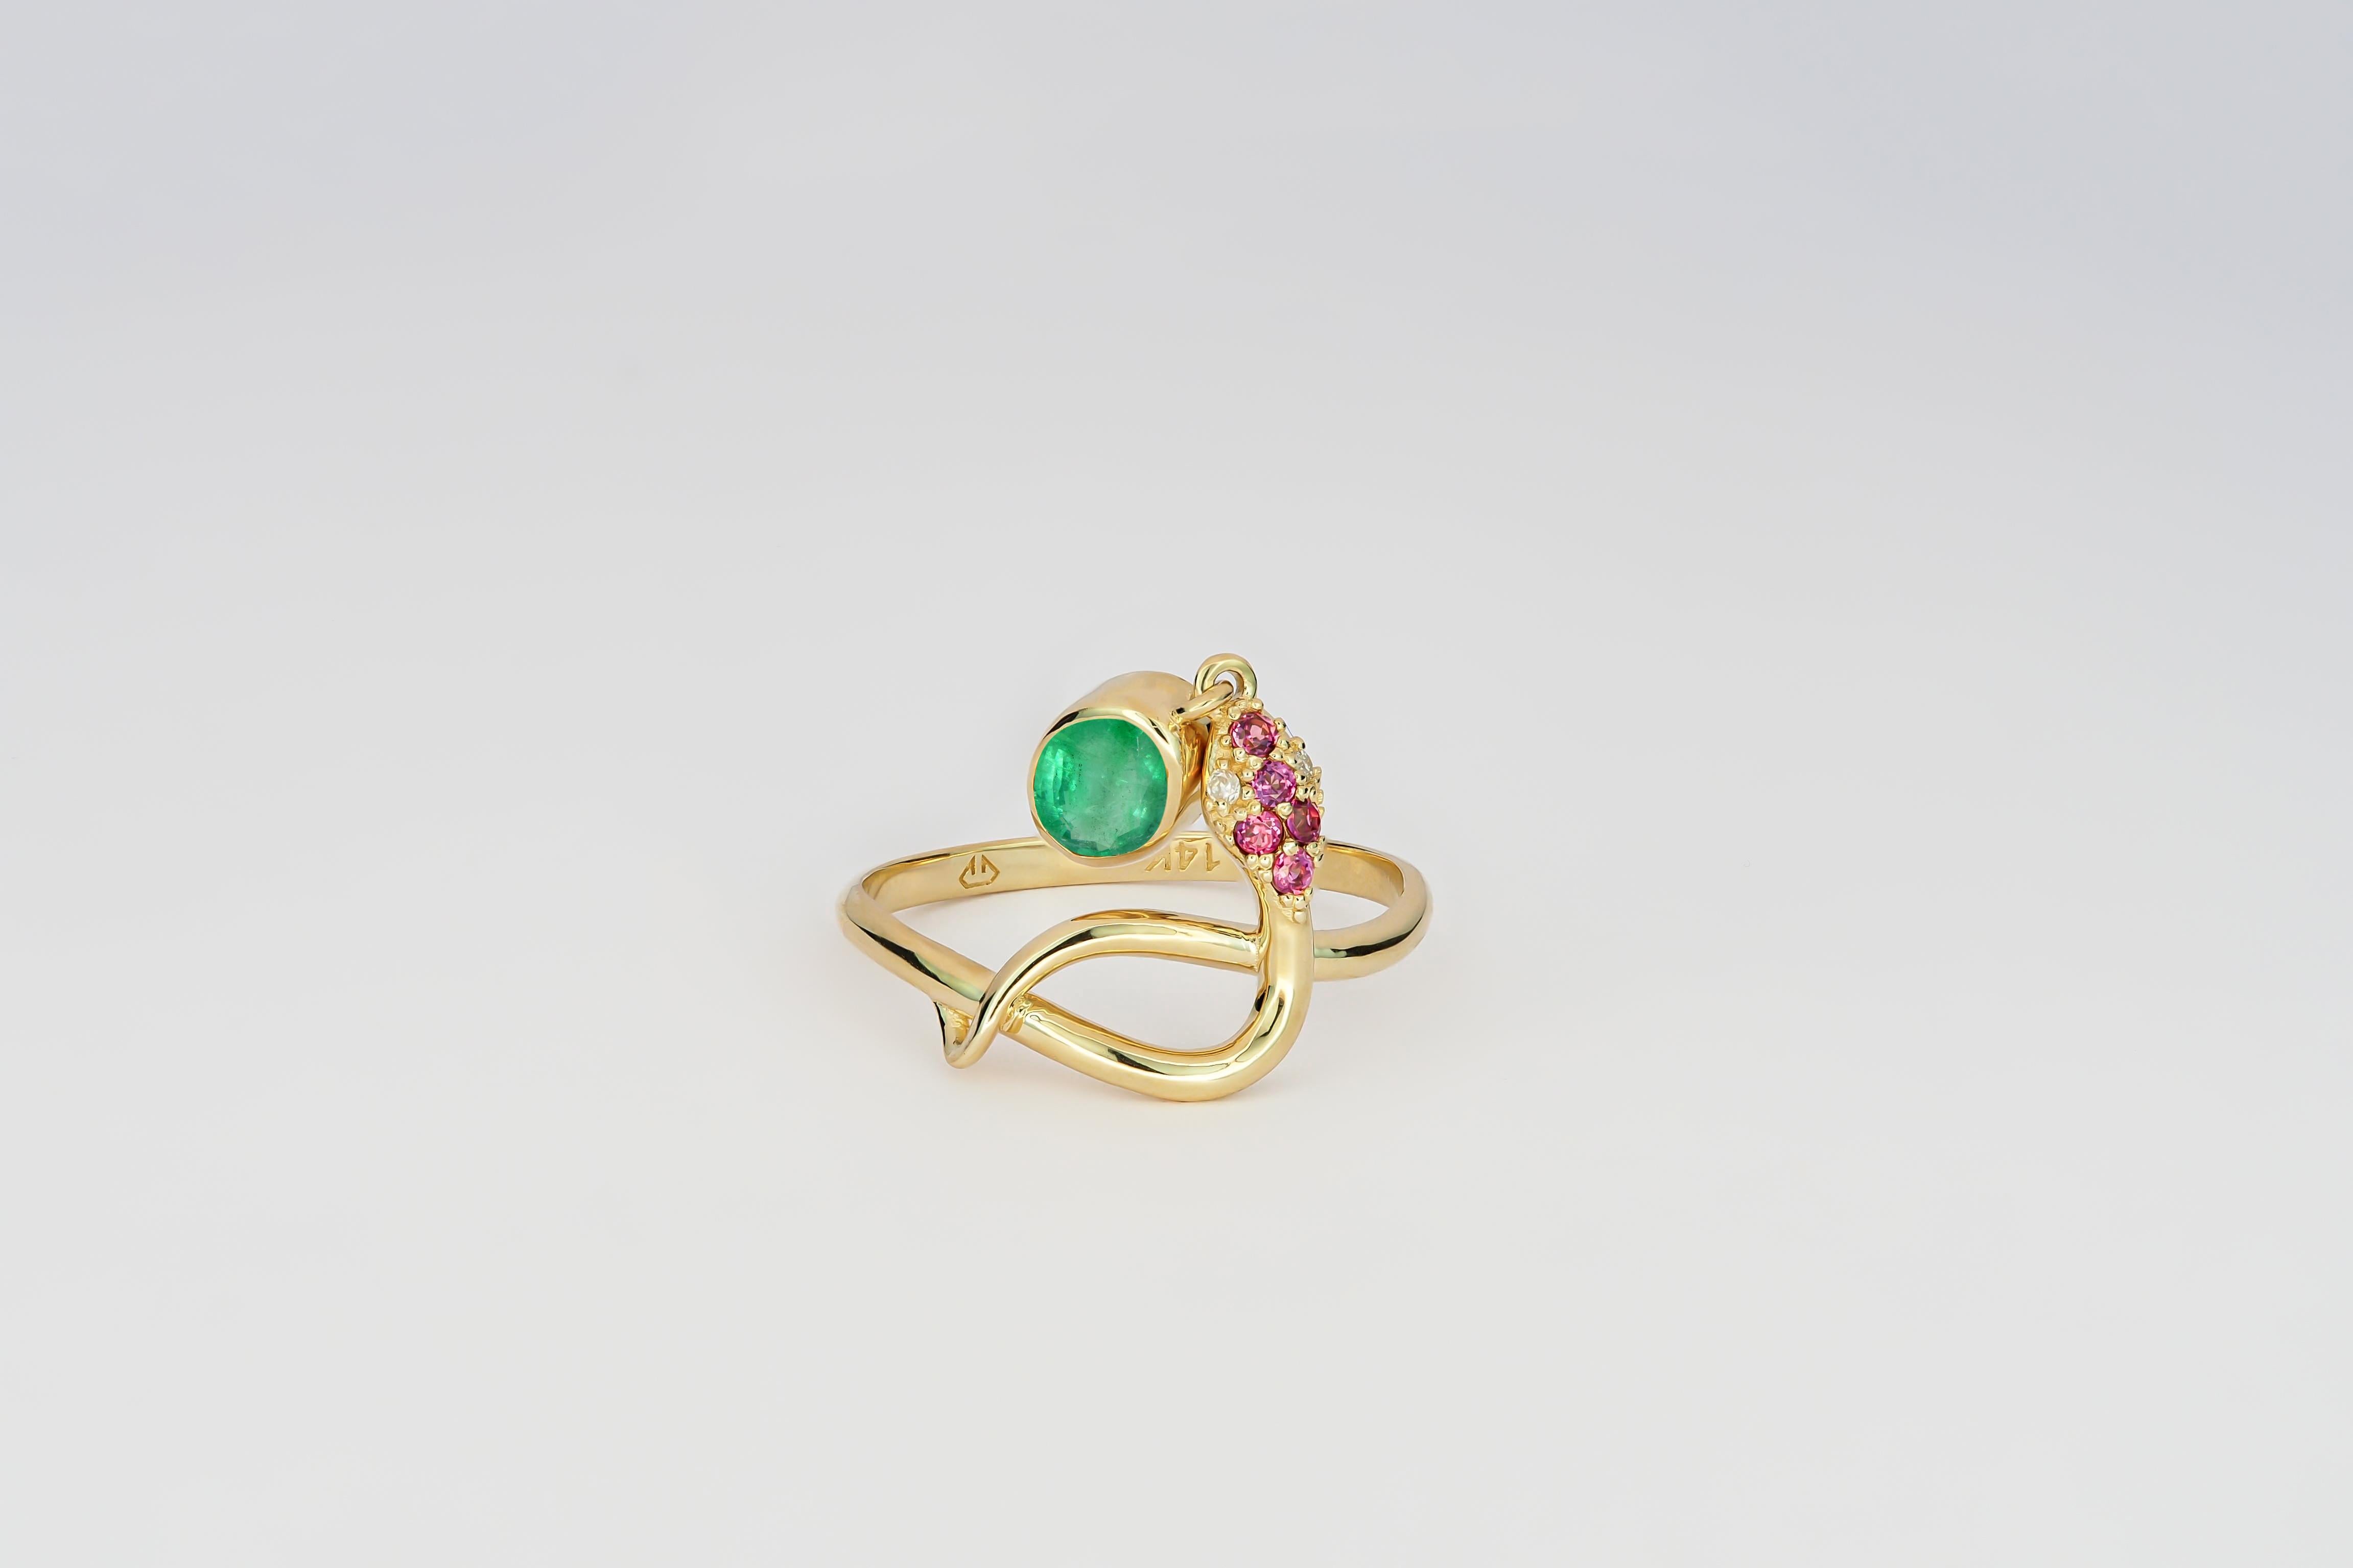 Snake ring with Emerald. Emerald gold ring. Snake gold ring. Genuine Emerald ring. Oval Emerald ring. May birthstone ring. Emerald vintage ring. 
14k yellow gold ring with blue Emerald, rose sapphires and diamonds. 

Metal: 14k gold.
Weight: 2.25 g.